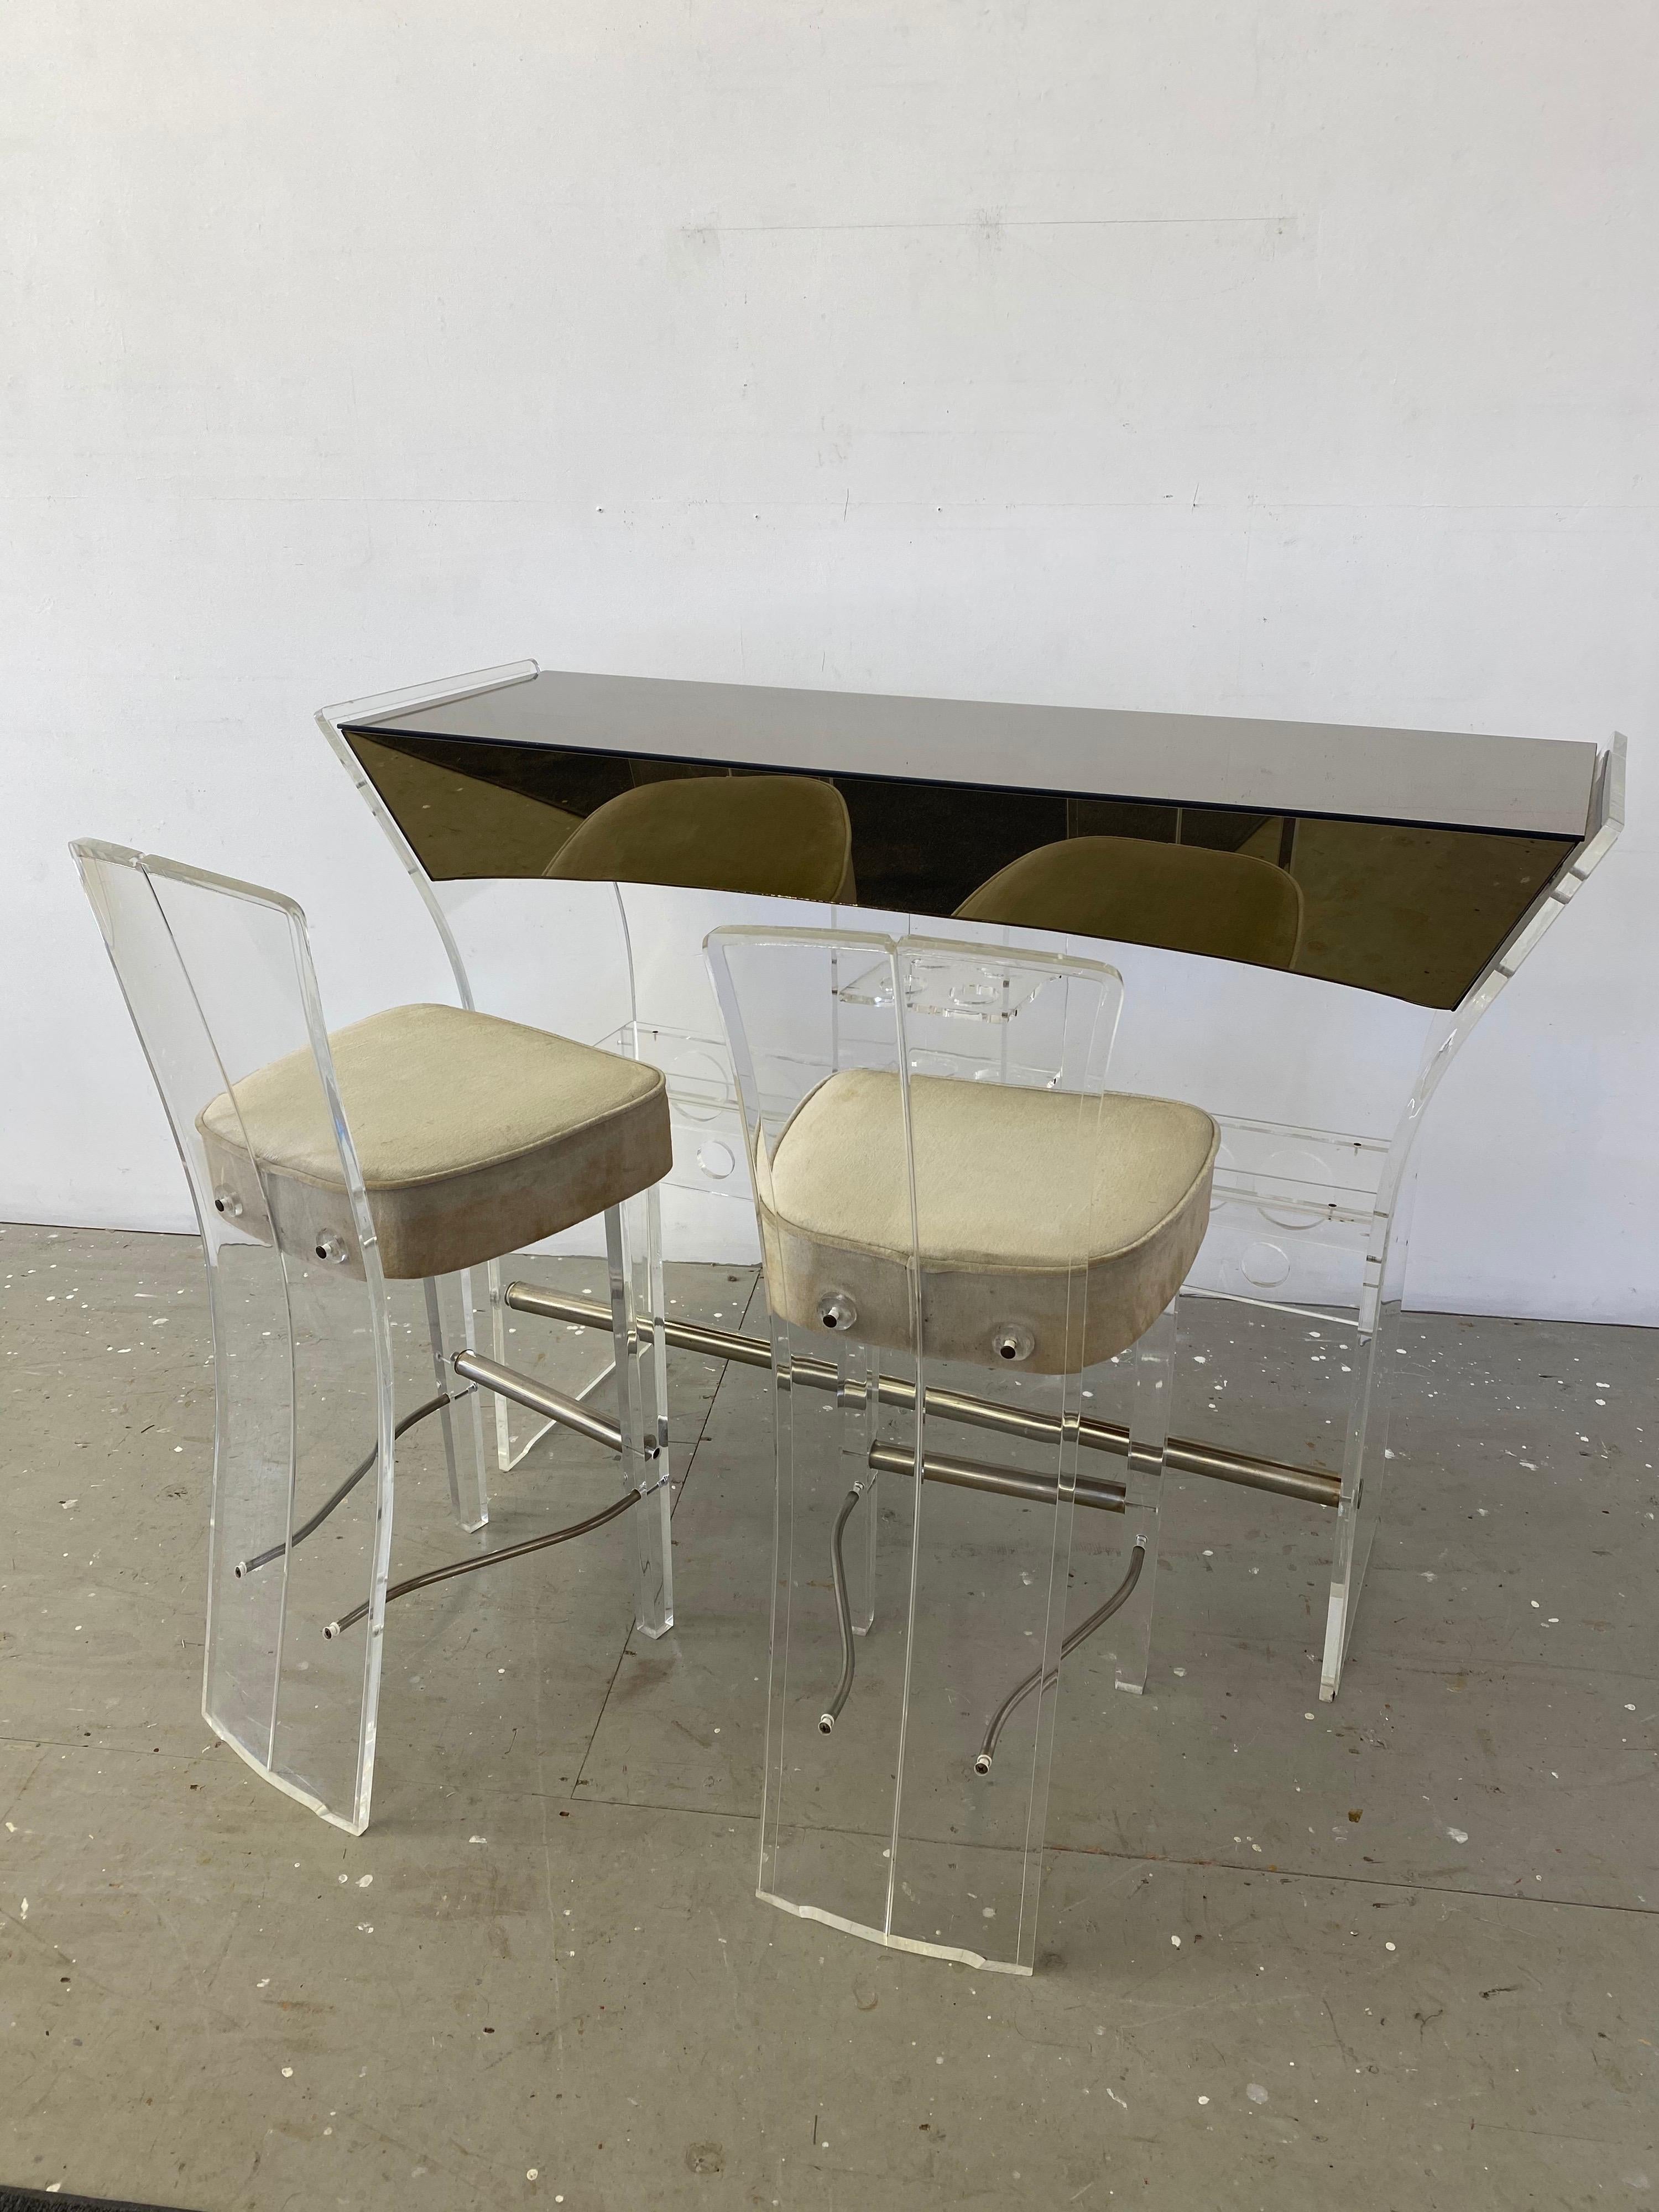 1970's Bar and 2 matching Bar Stools. Tons of storage below!  Lucite is very clean, Mirrors are  in great shape. Mirrors have a slight smokey gray cast to them. Bar stools are covered in the original velvet fabric, fabric shows wear and should be